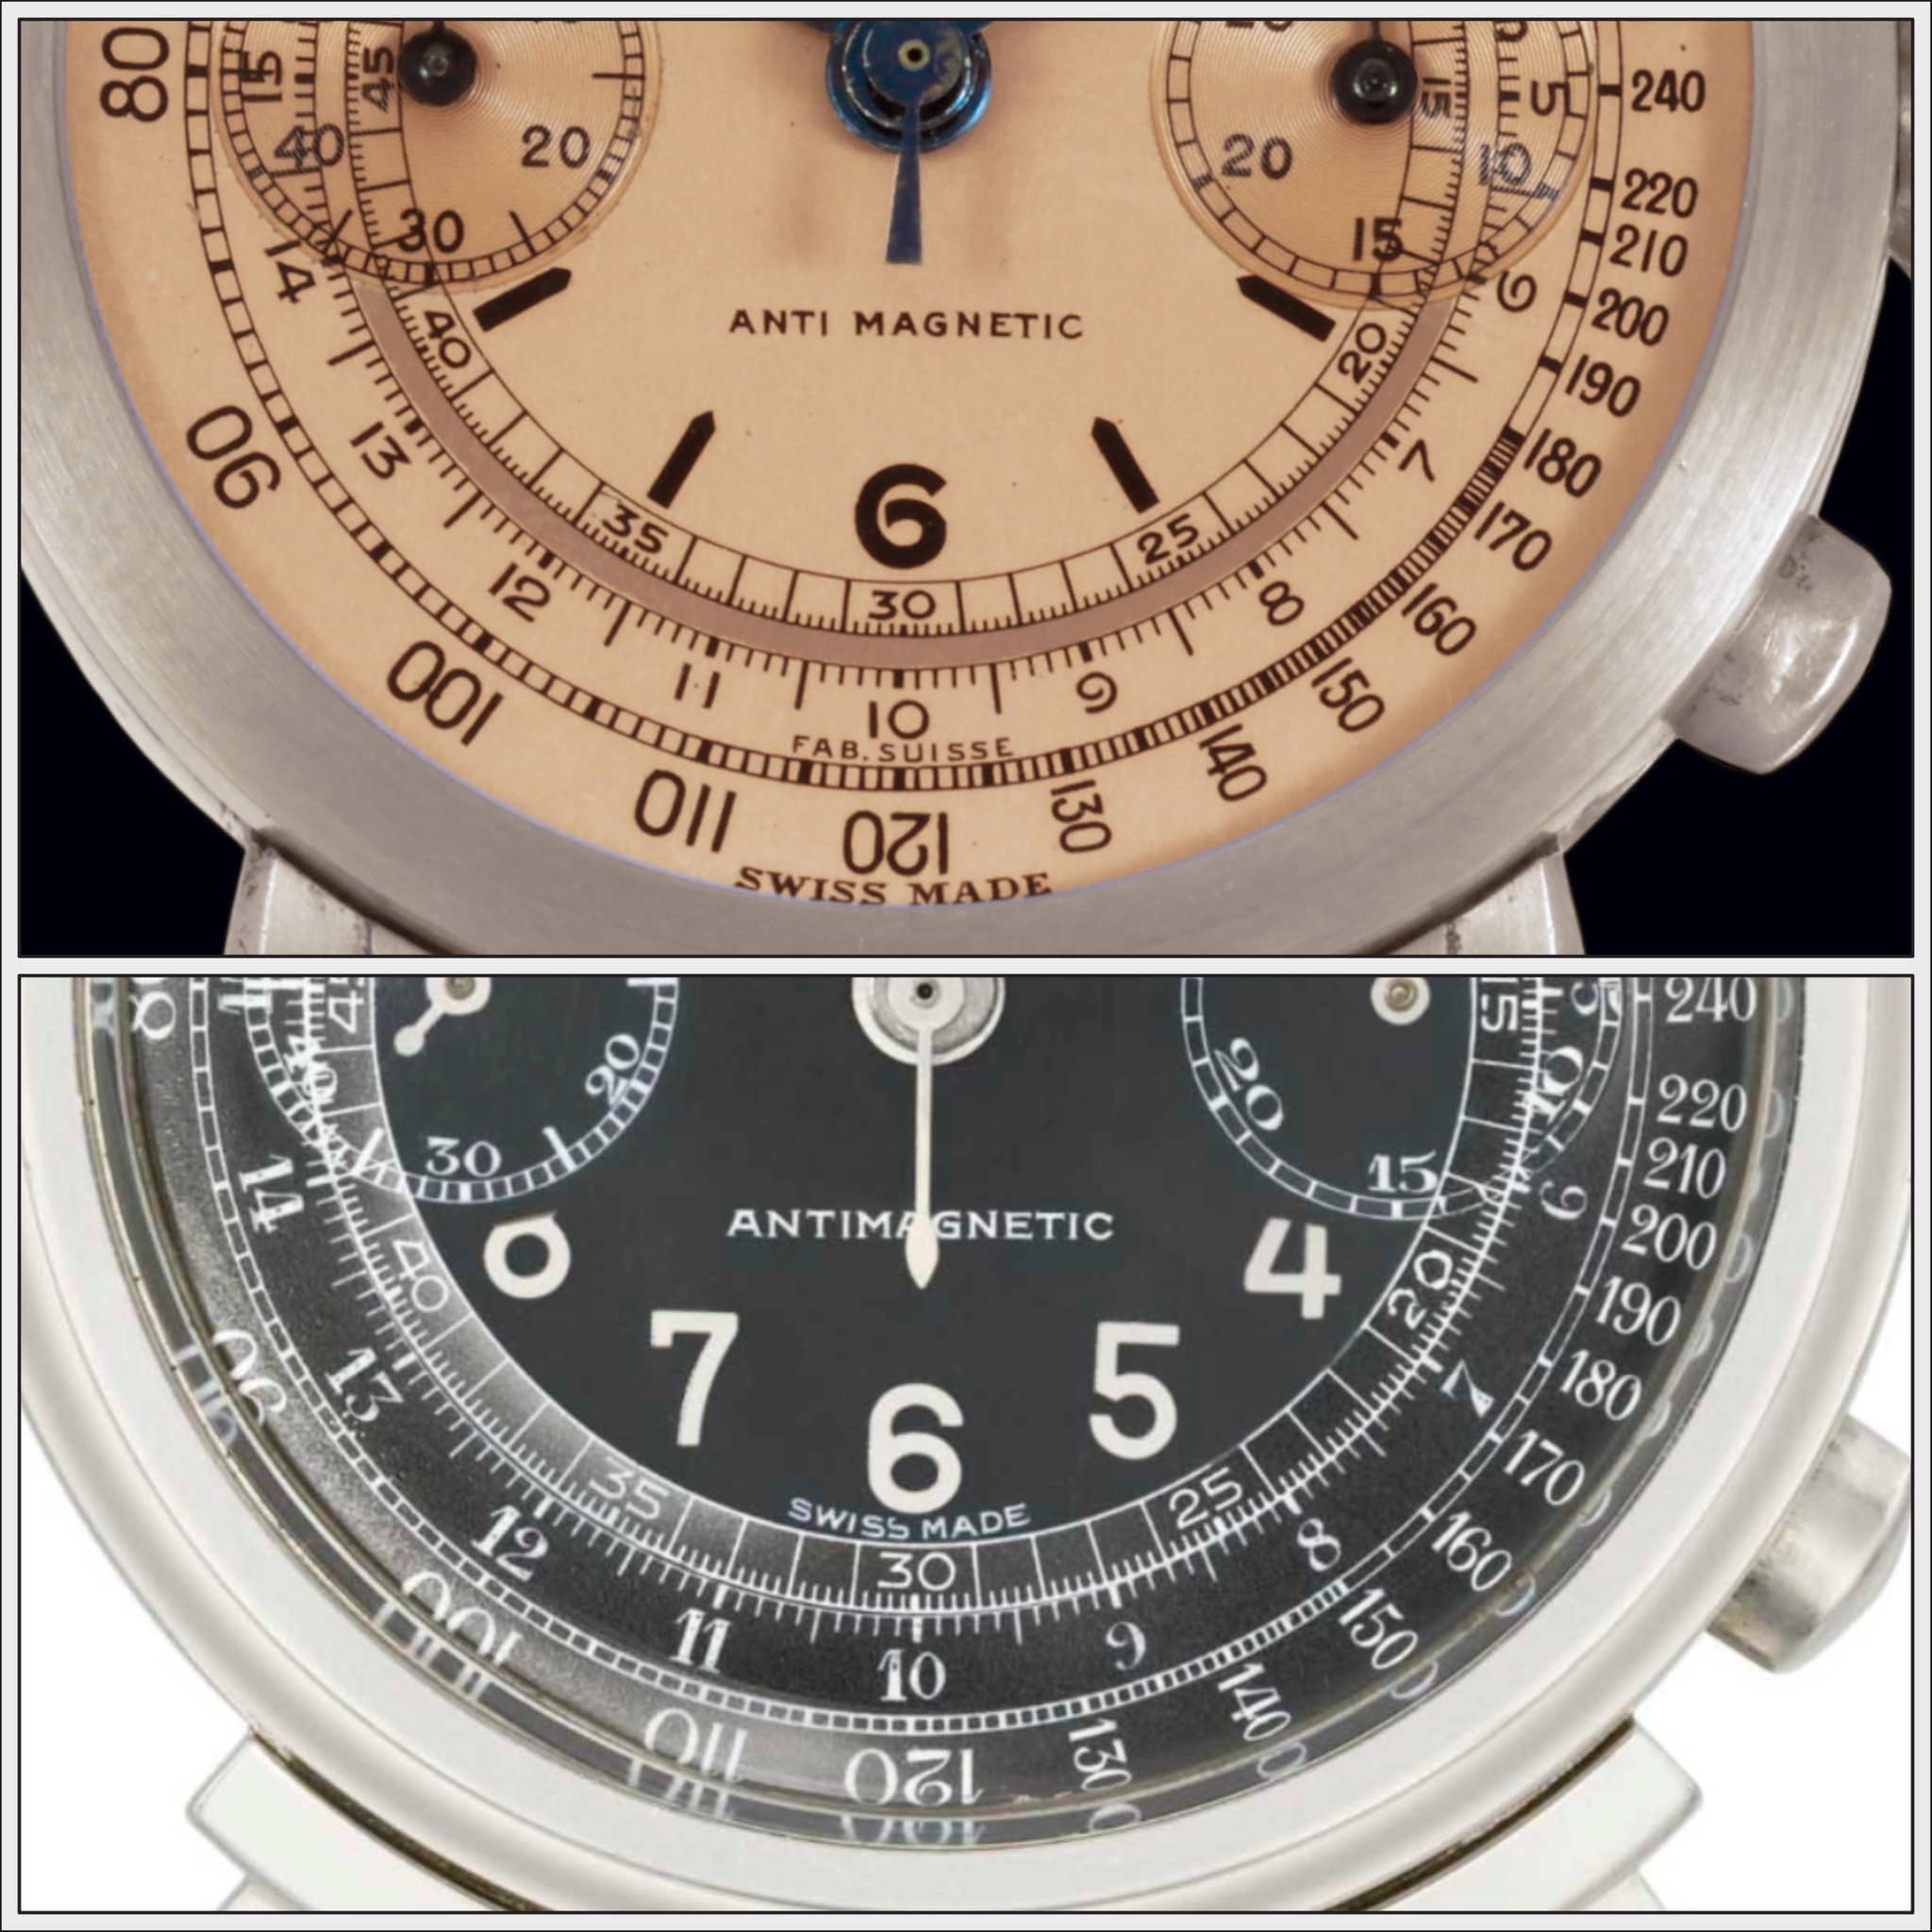 Different Font and Swiss Made versions on the Rolex Non-Oyster vintage chronographs